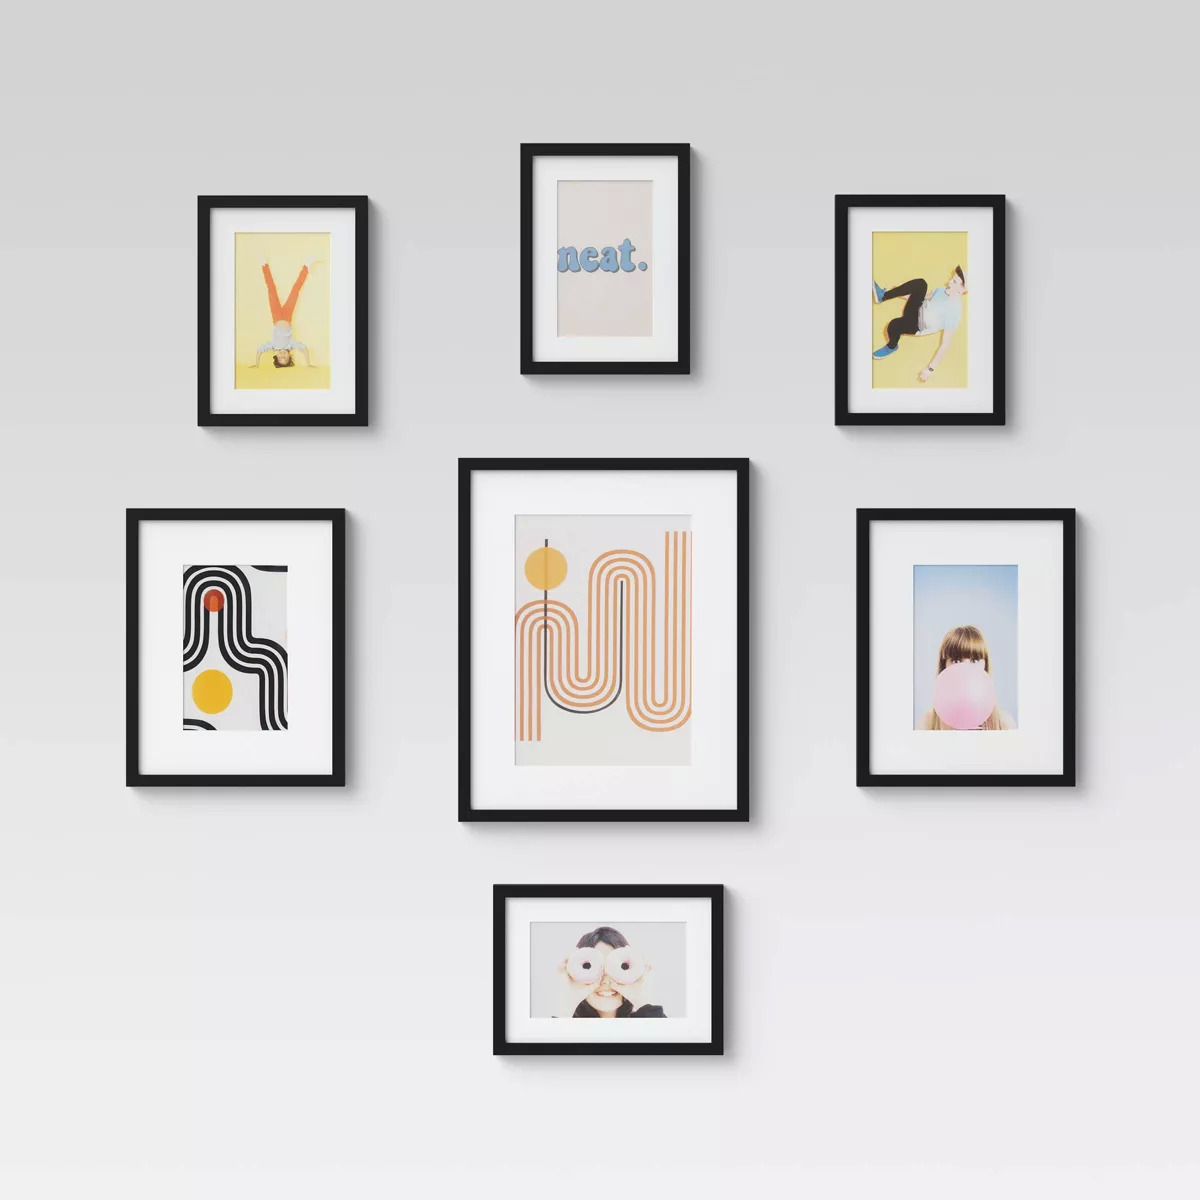 Room Essentials Gallery Frame Sets (Various) $28 + Free Store Pickup at Target or FS on $35+